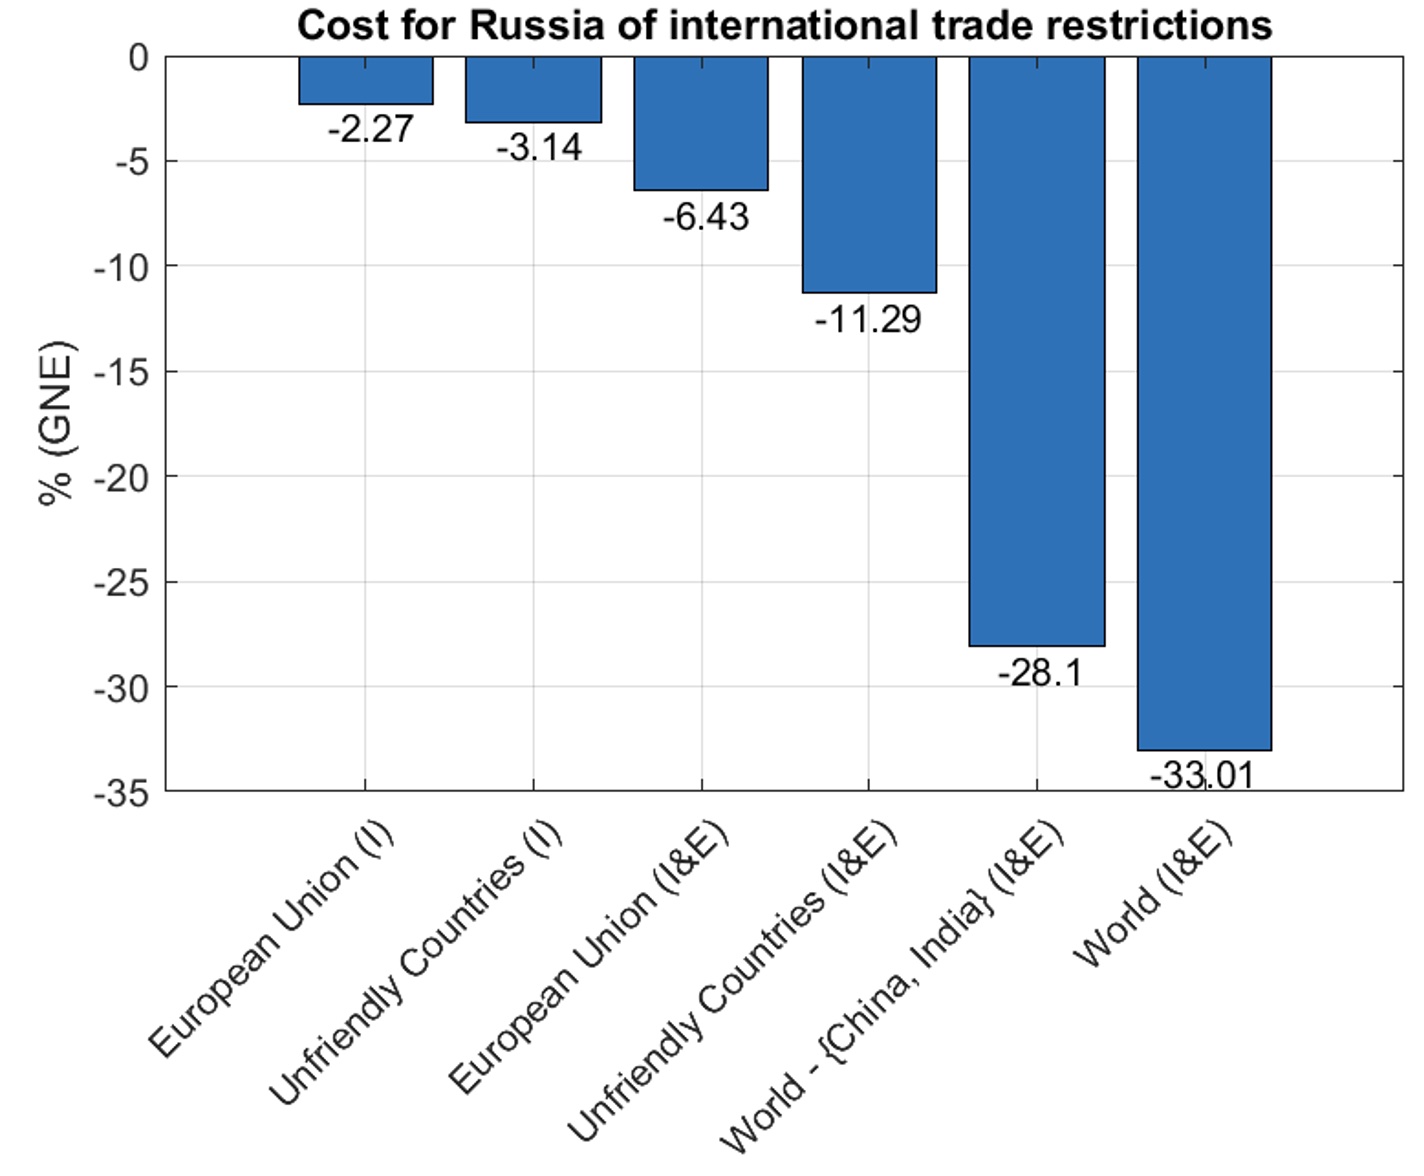 The economic cost of trade restrictions on Russia 2